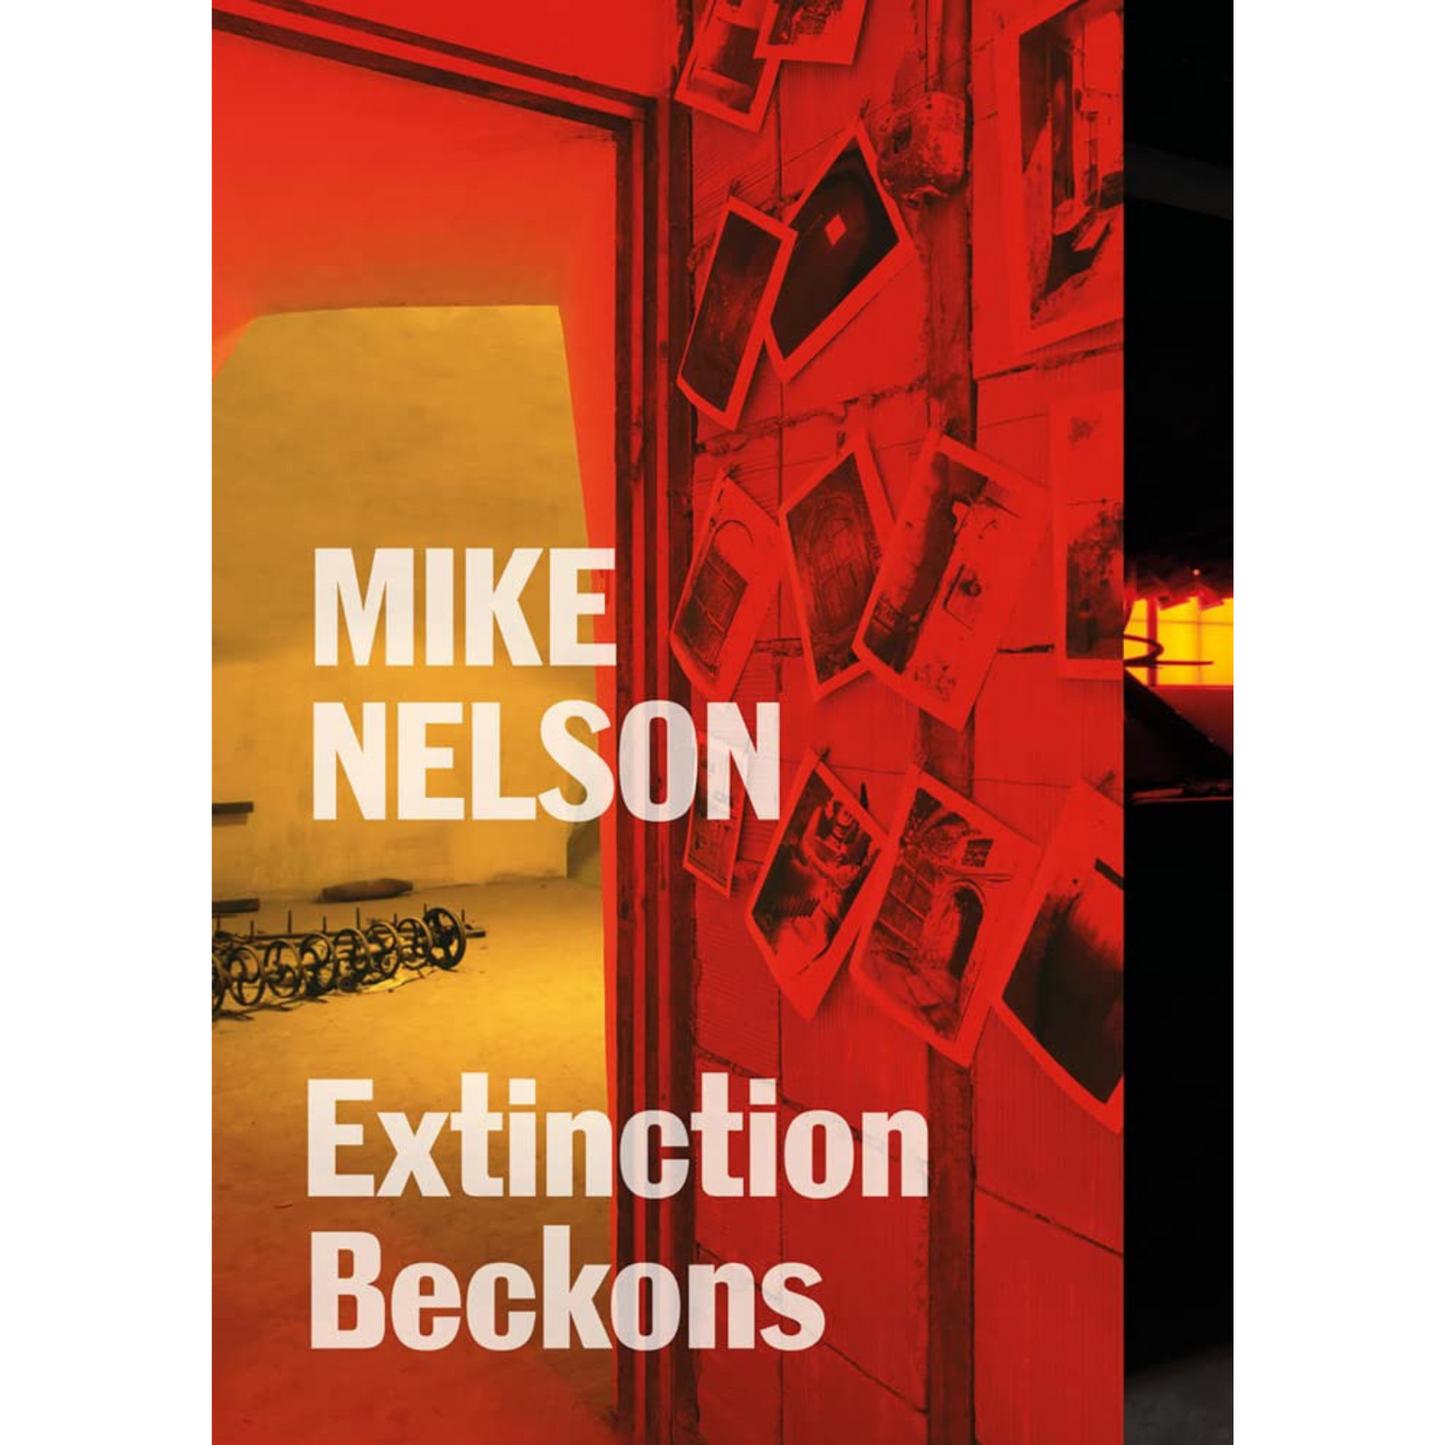 Mike Nelson: Extinction Beckons